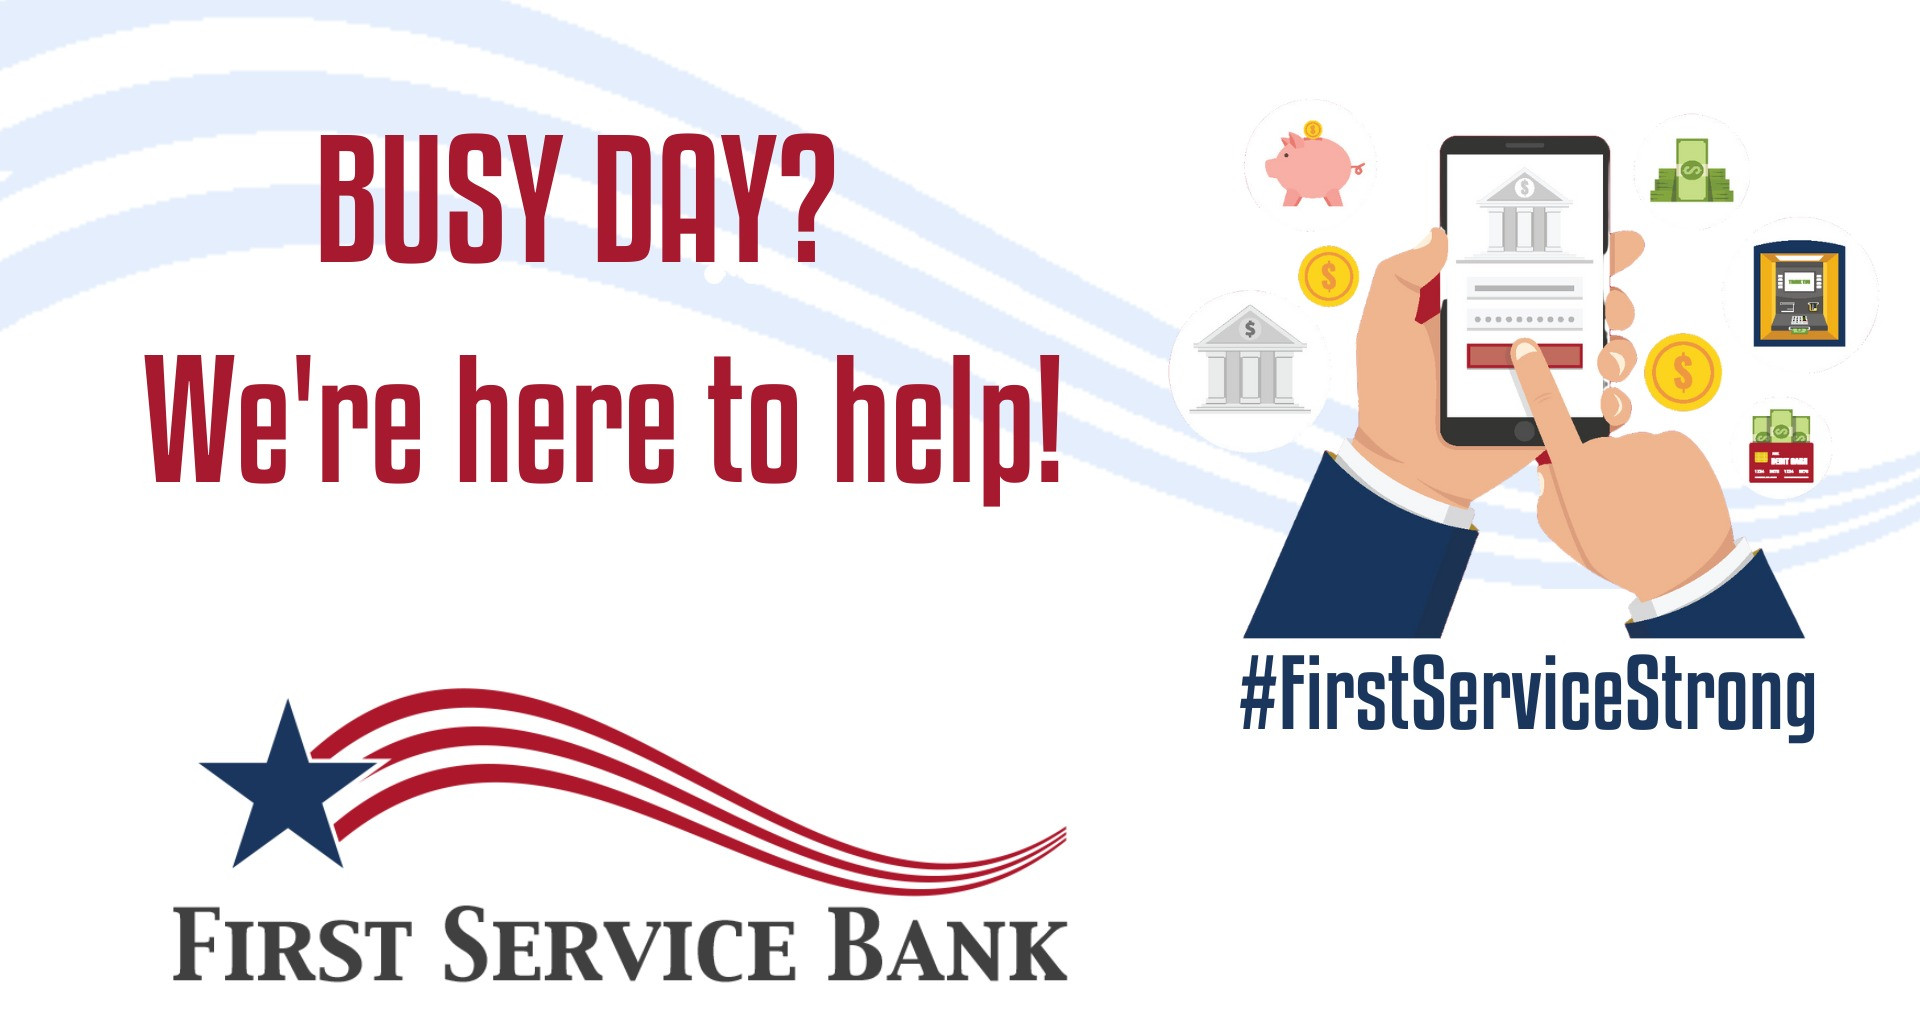 Discovering First Service benefits